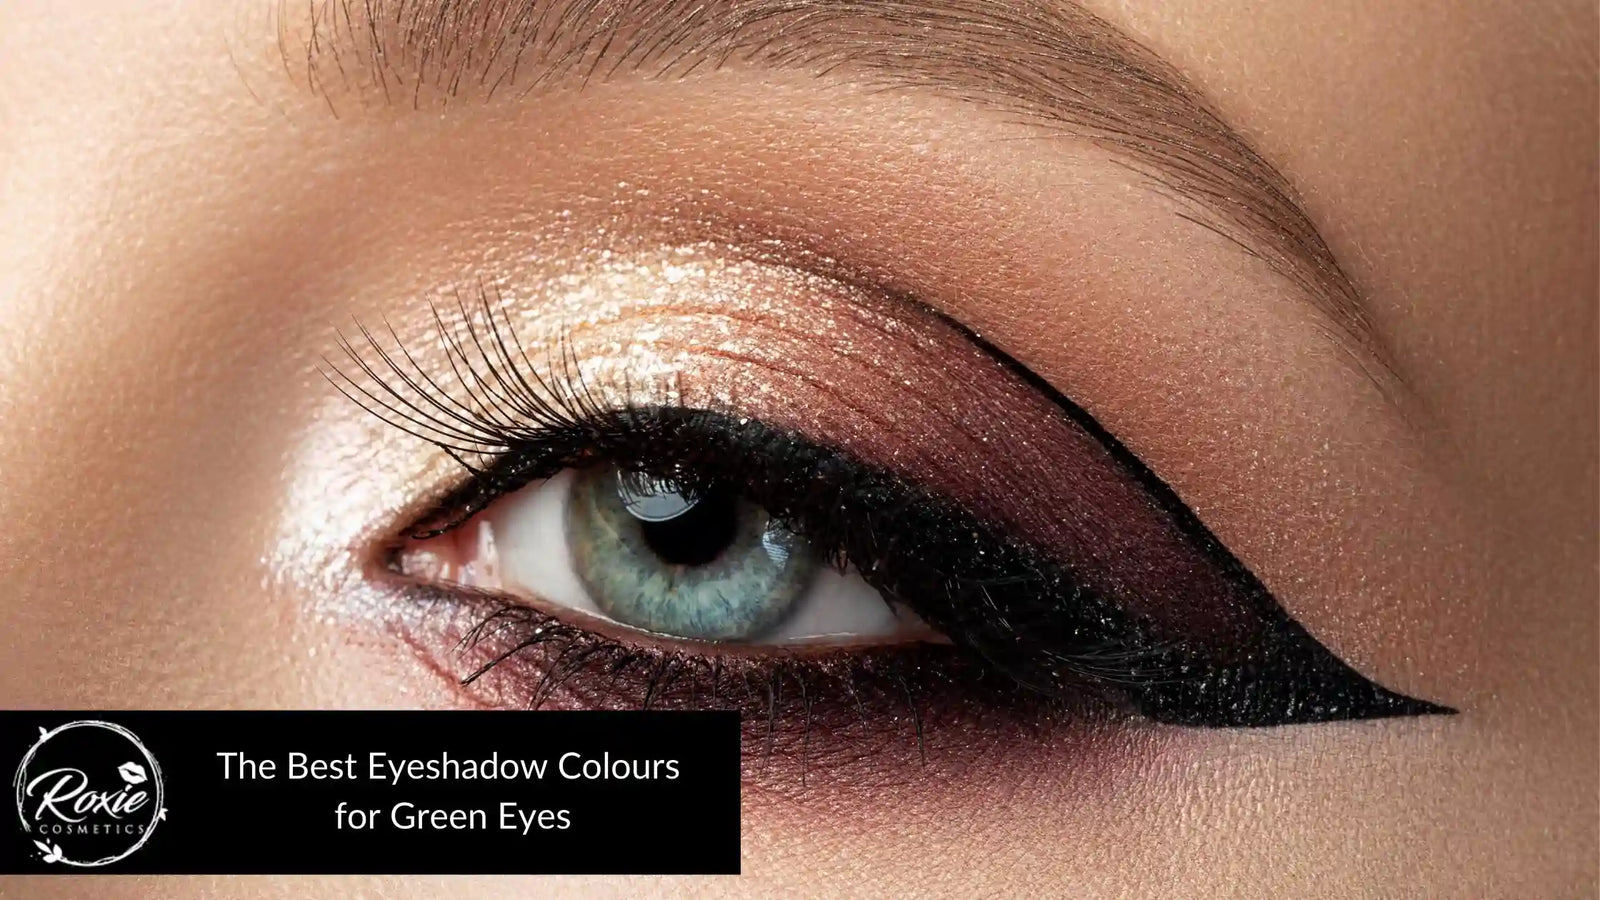 makeup for green eyes step by step